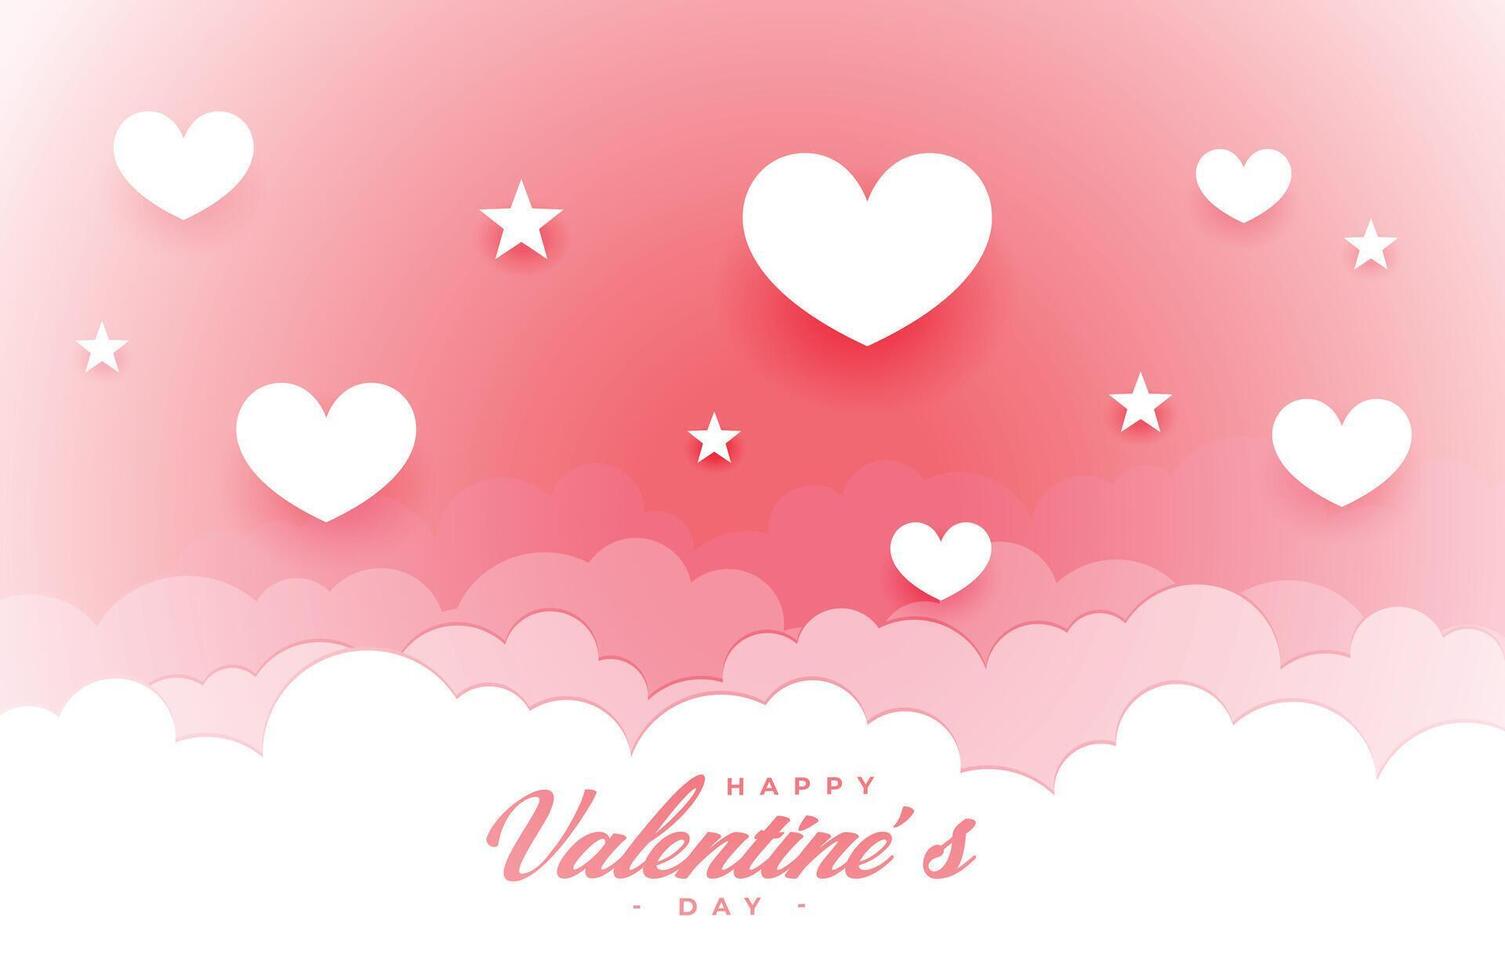 valentines day card in paper style with clouds and hearts vector